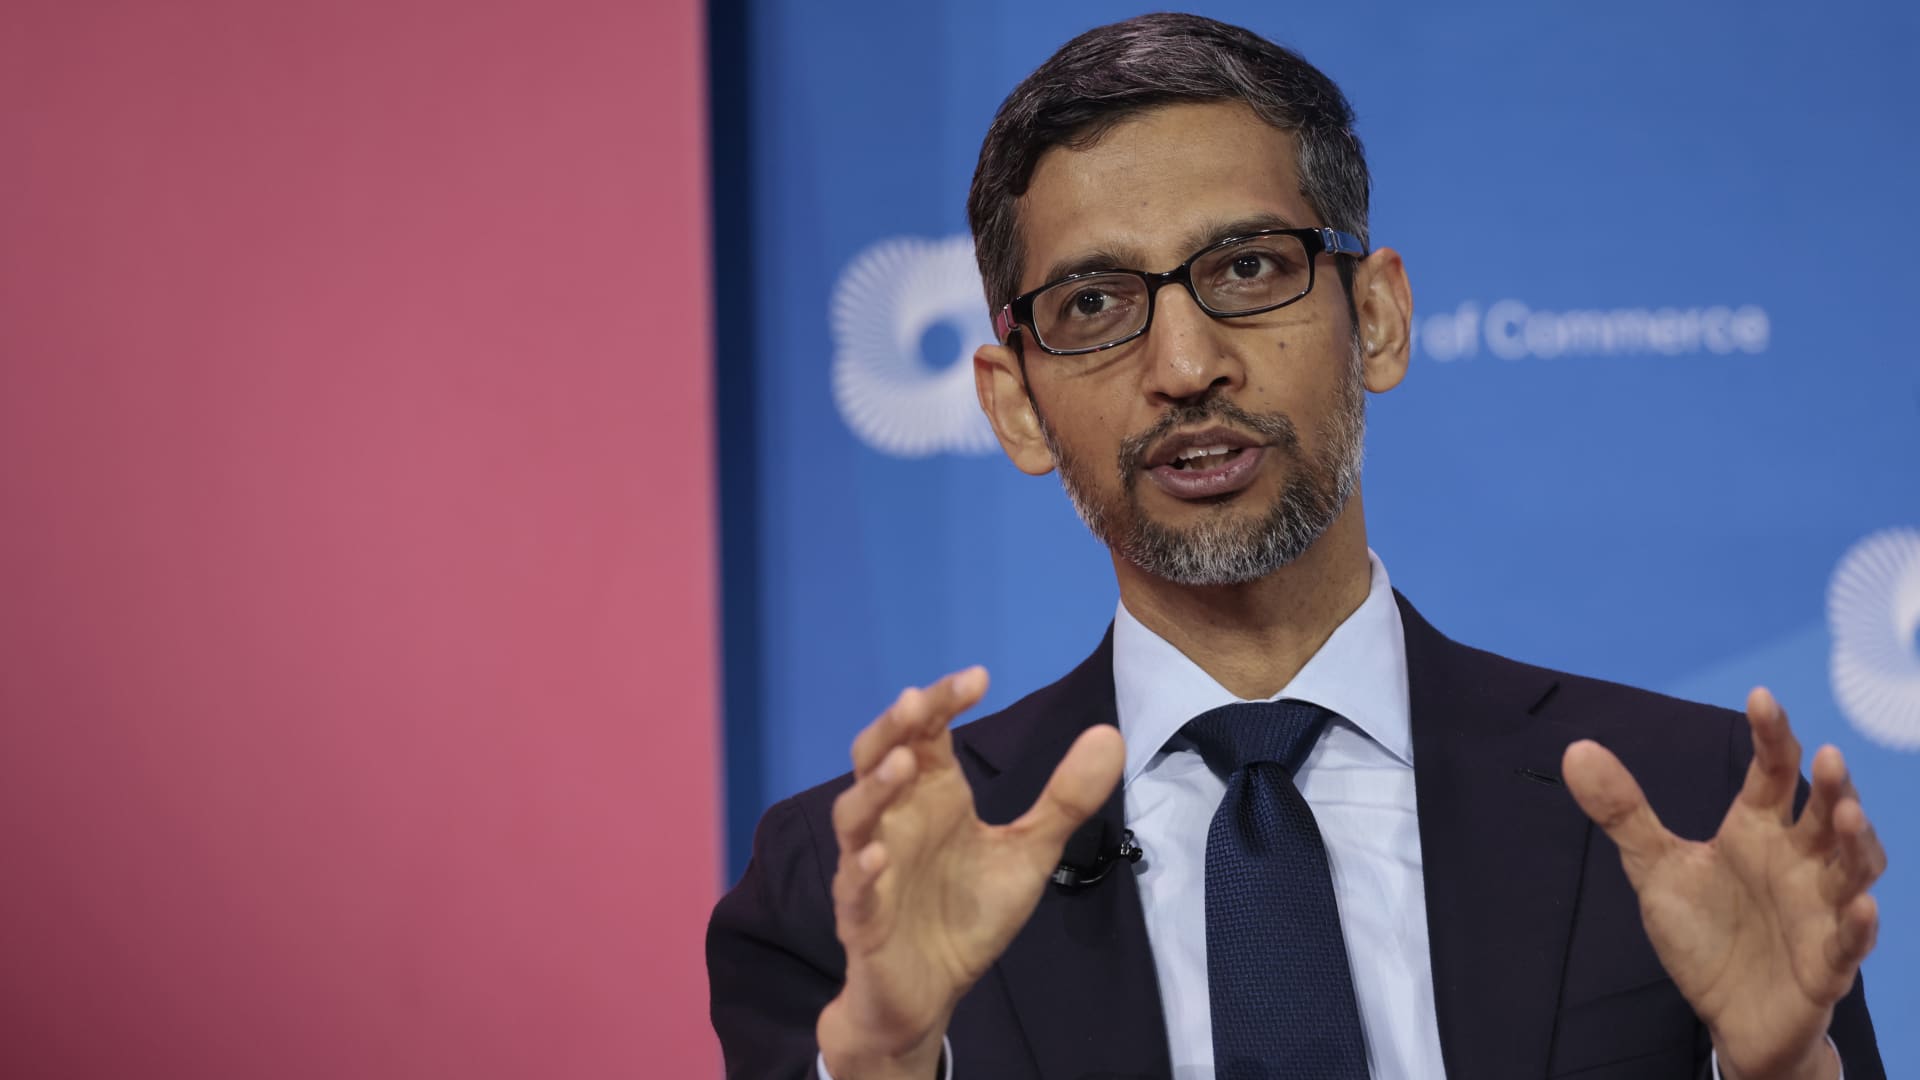 Google will lay off 12,000 people, says a memo from CEO Sundar Pichai